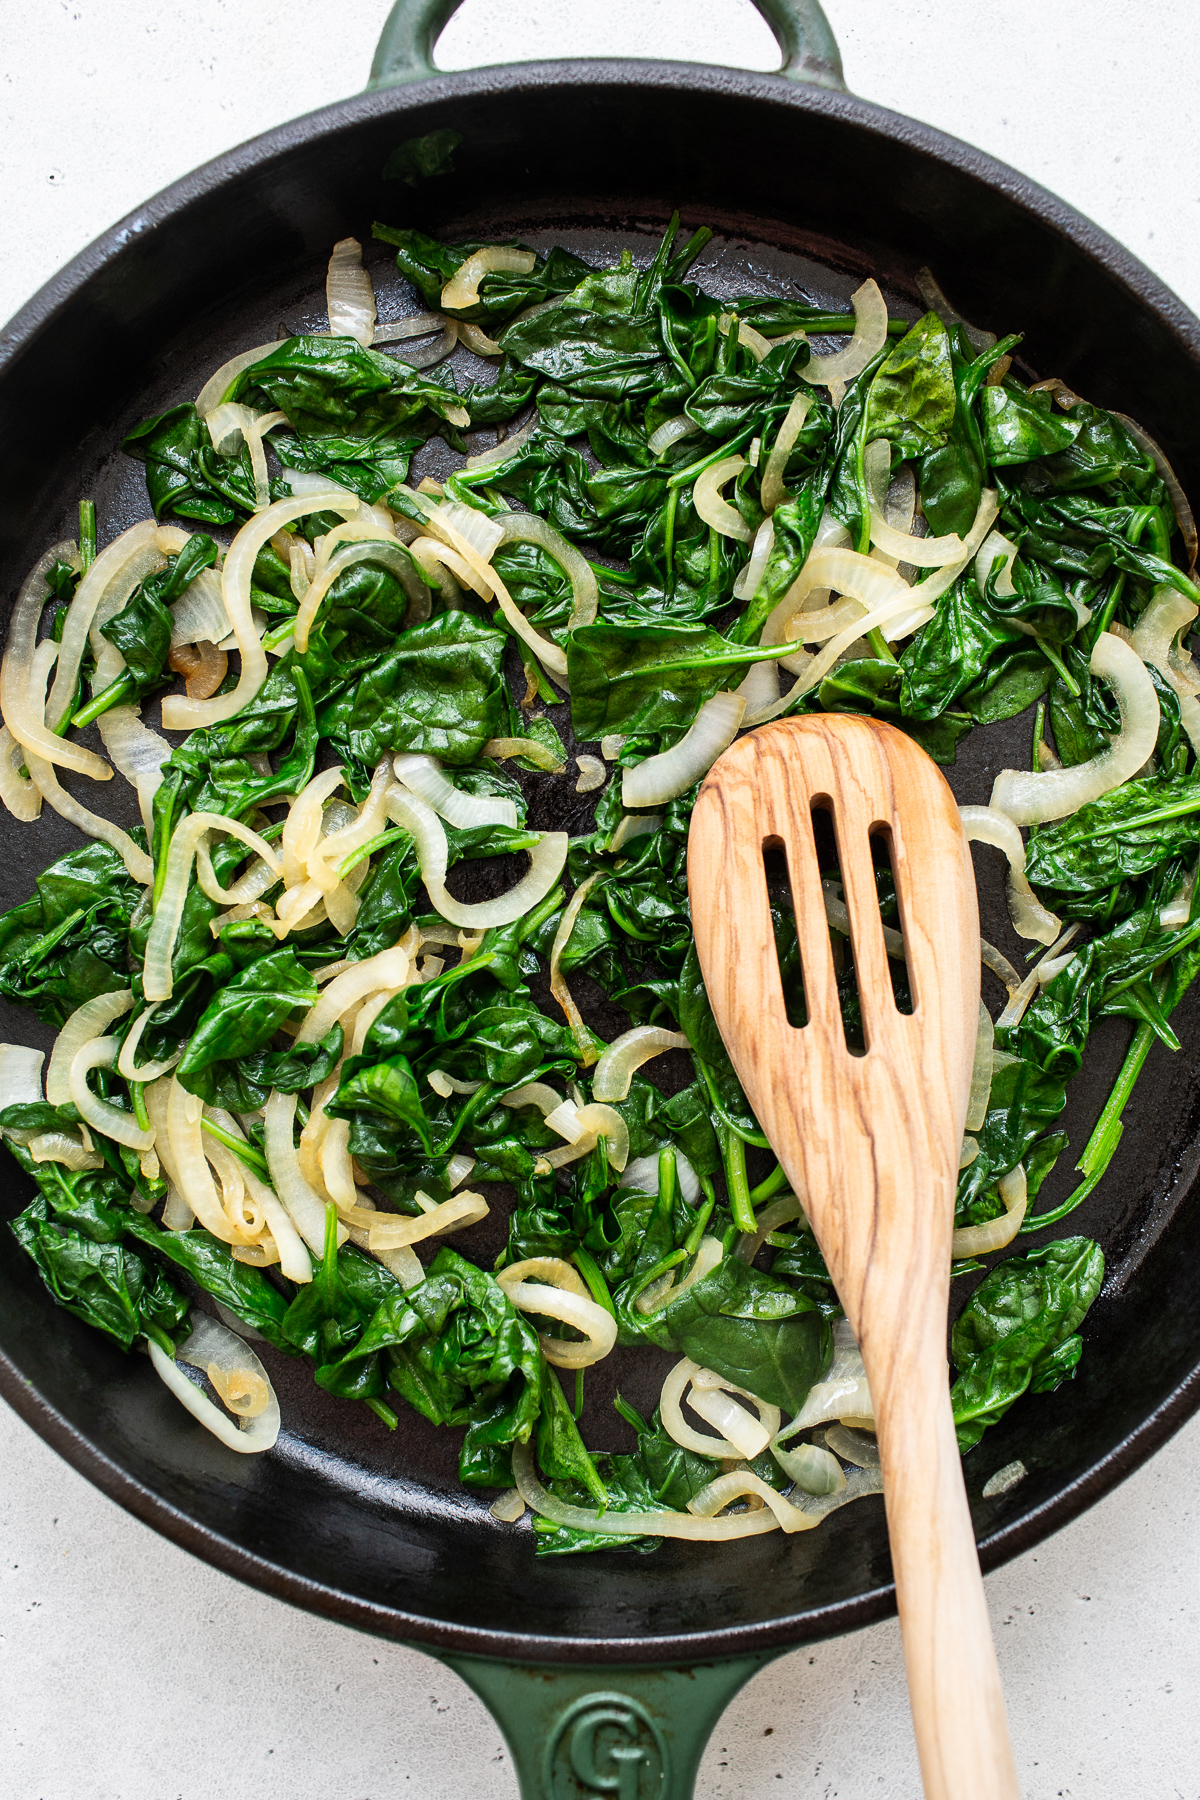 Spinach and onions sauteing in a skillet.